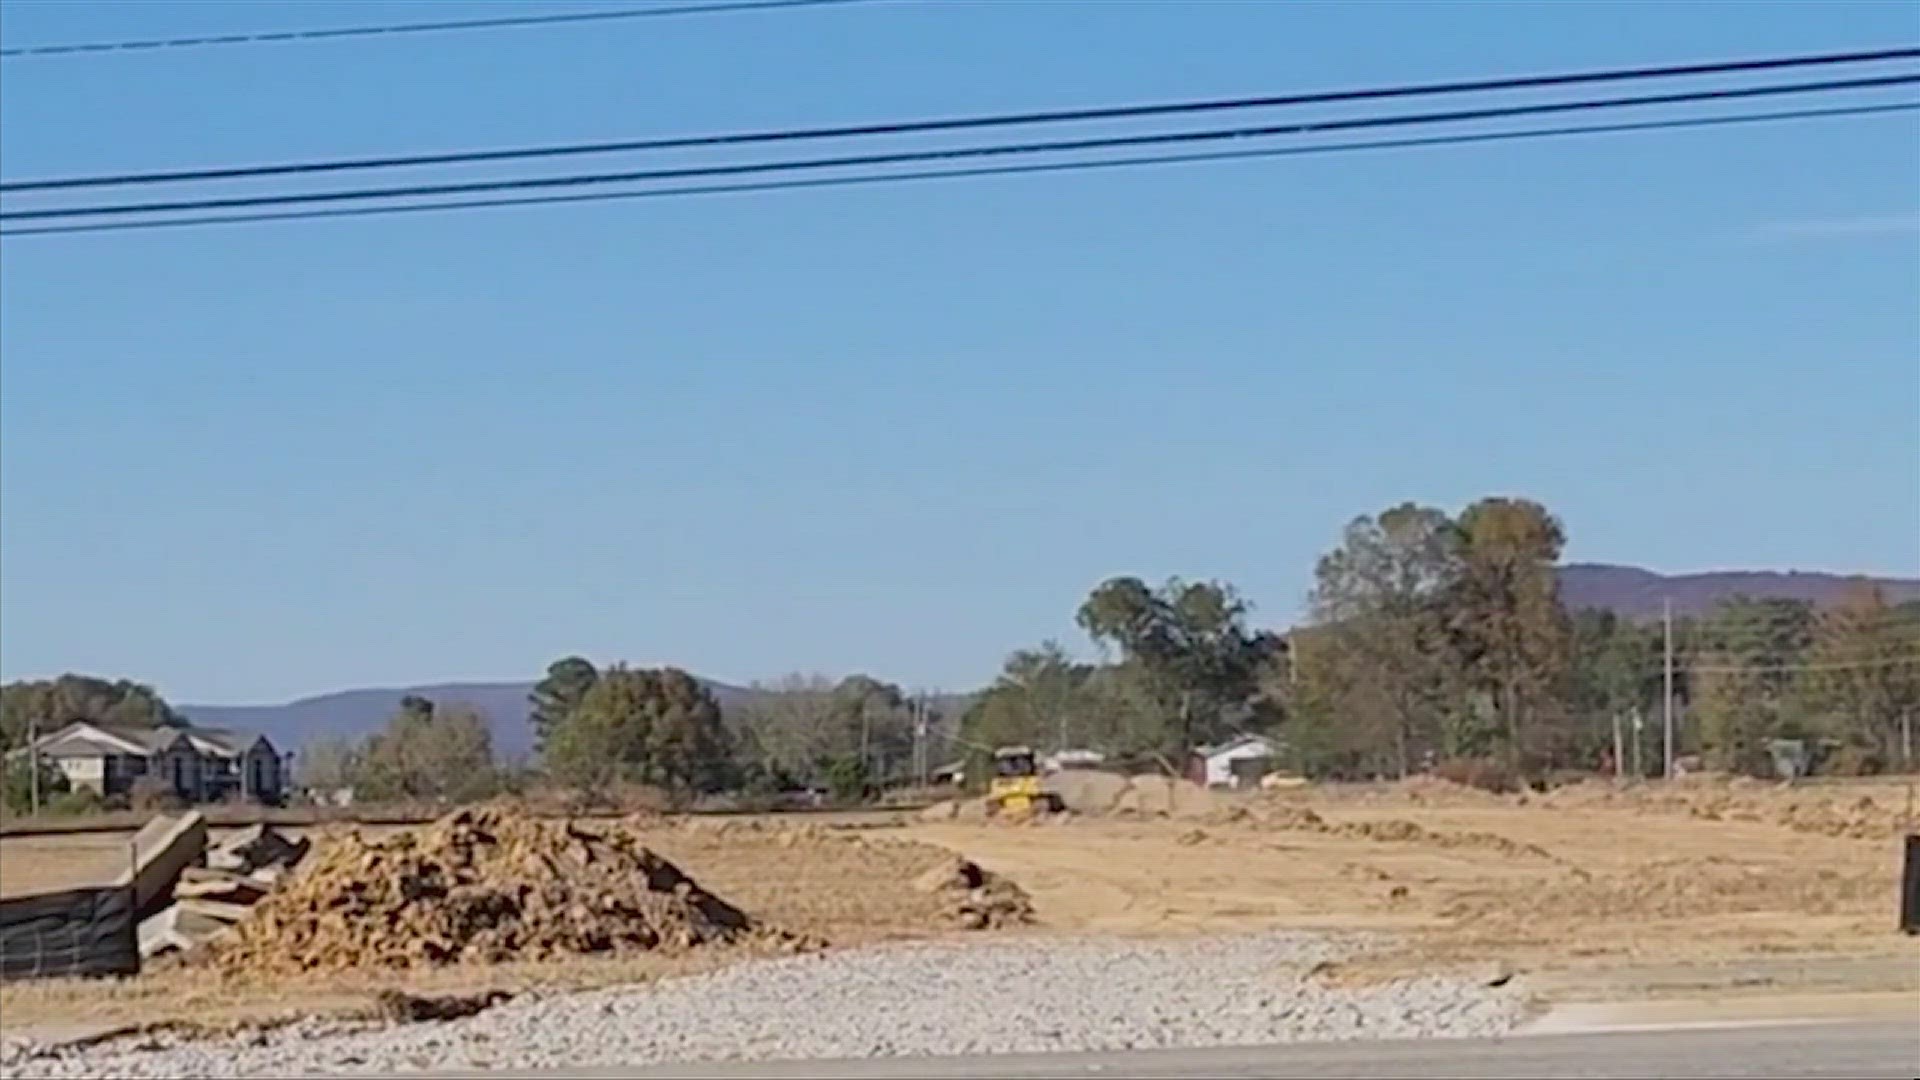 Big development is coming to Big Cove, but first, the roads need to get put in place.